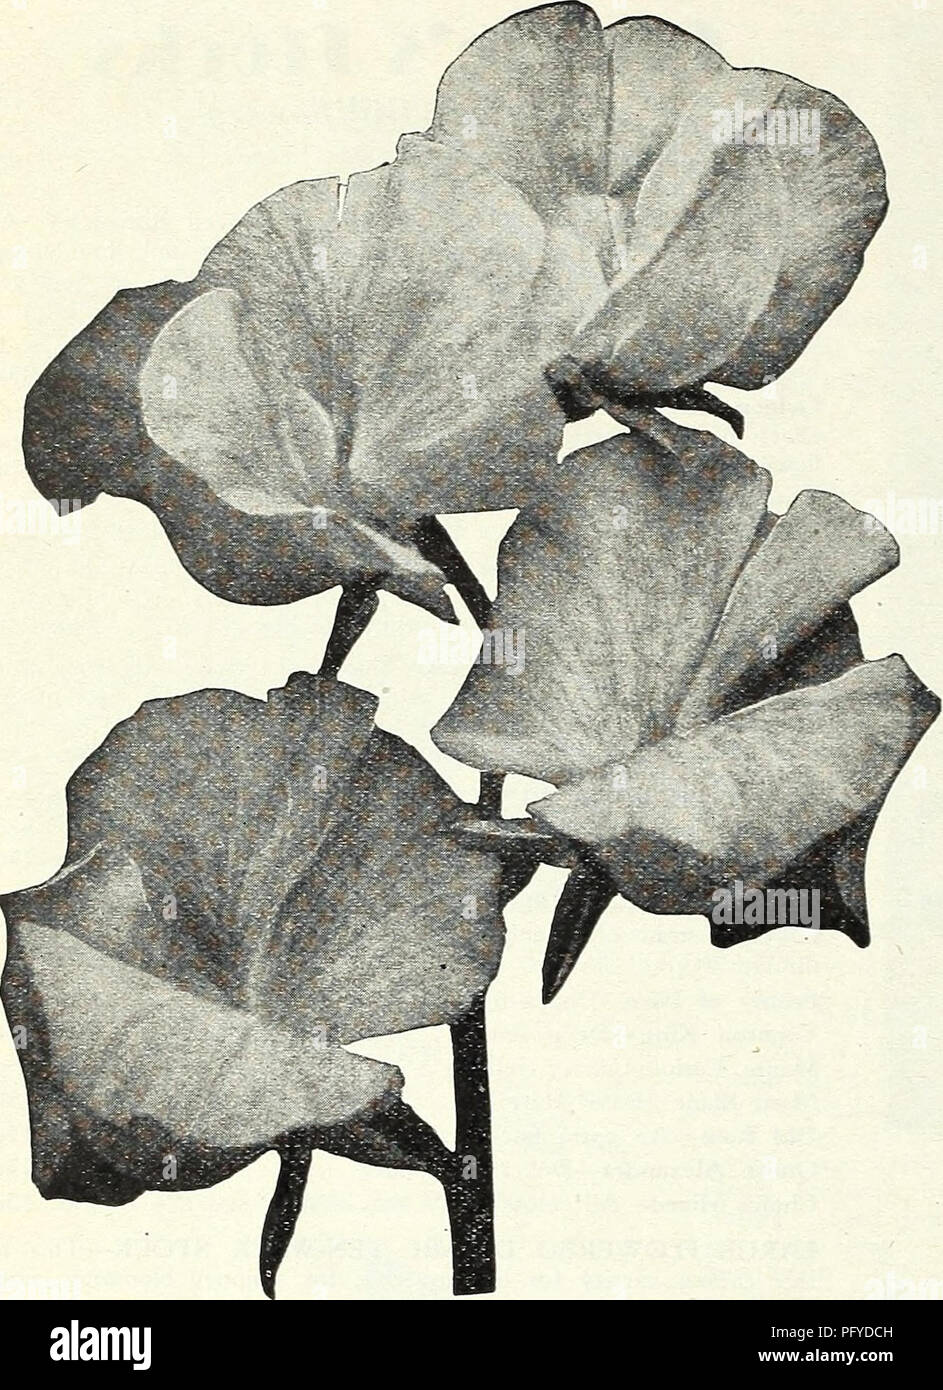 . Currie Bros. : fifty-eighth year 1933. Flowers Seeds Catalogs; Bulbs (Plants) Seeds Catalogs; Vegetables Seeds Catalogs; Nurseries (Horticulture) Catalogs; Plants, Ornamental Catalogs; Gardening Equipment and supplies Catalogs. Page 38 CURRIE BROTHERS CO.. Sweet Peas Beautiful, Fragrant, Fashionable HOW TO GROW THEM—Sweet Peas should be planted as early in spring as the ground can be workedj Rich loam with an abundance of well rotted manure is an ideal soil. A trench about 6 inches deep should be made, sowing the seed thinly in the bottom, and cover with an inch of soil, pressing it down fir Stock Photo